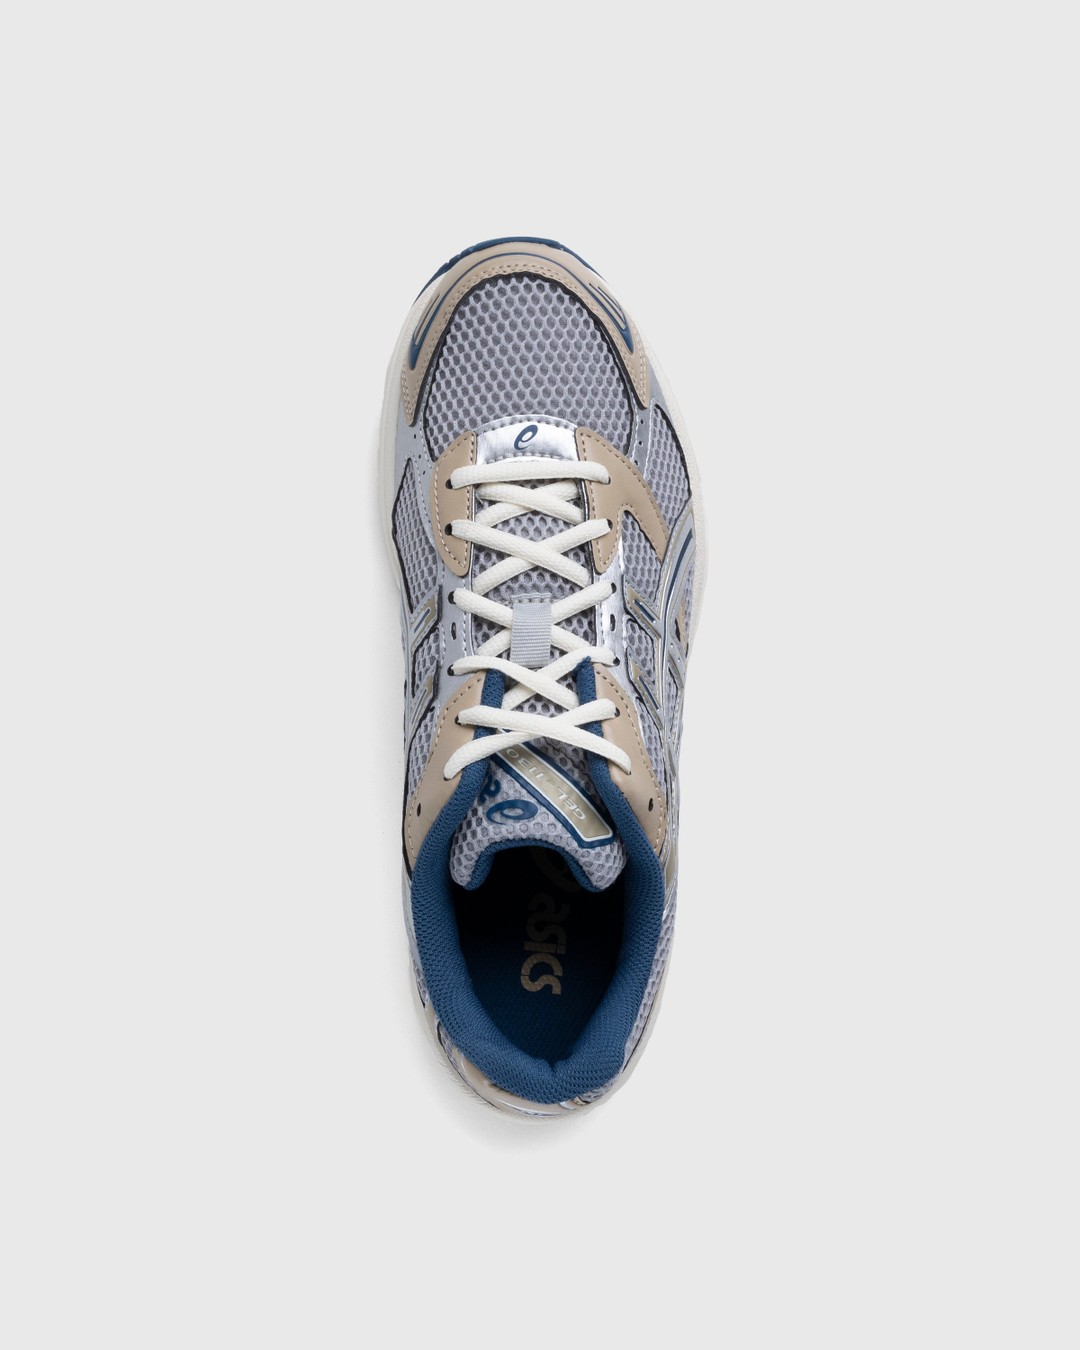 asics – Gel-1130 Oyster Grey Pure Silver - Sneakers - Beige - Image 3